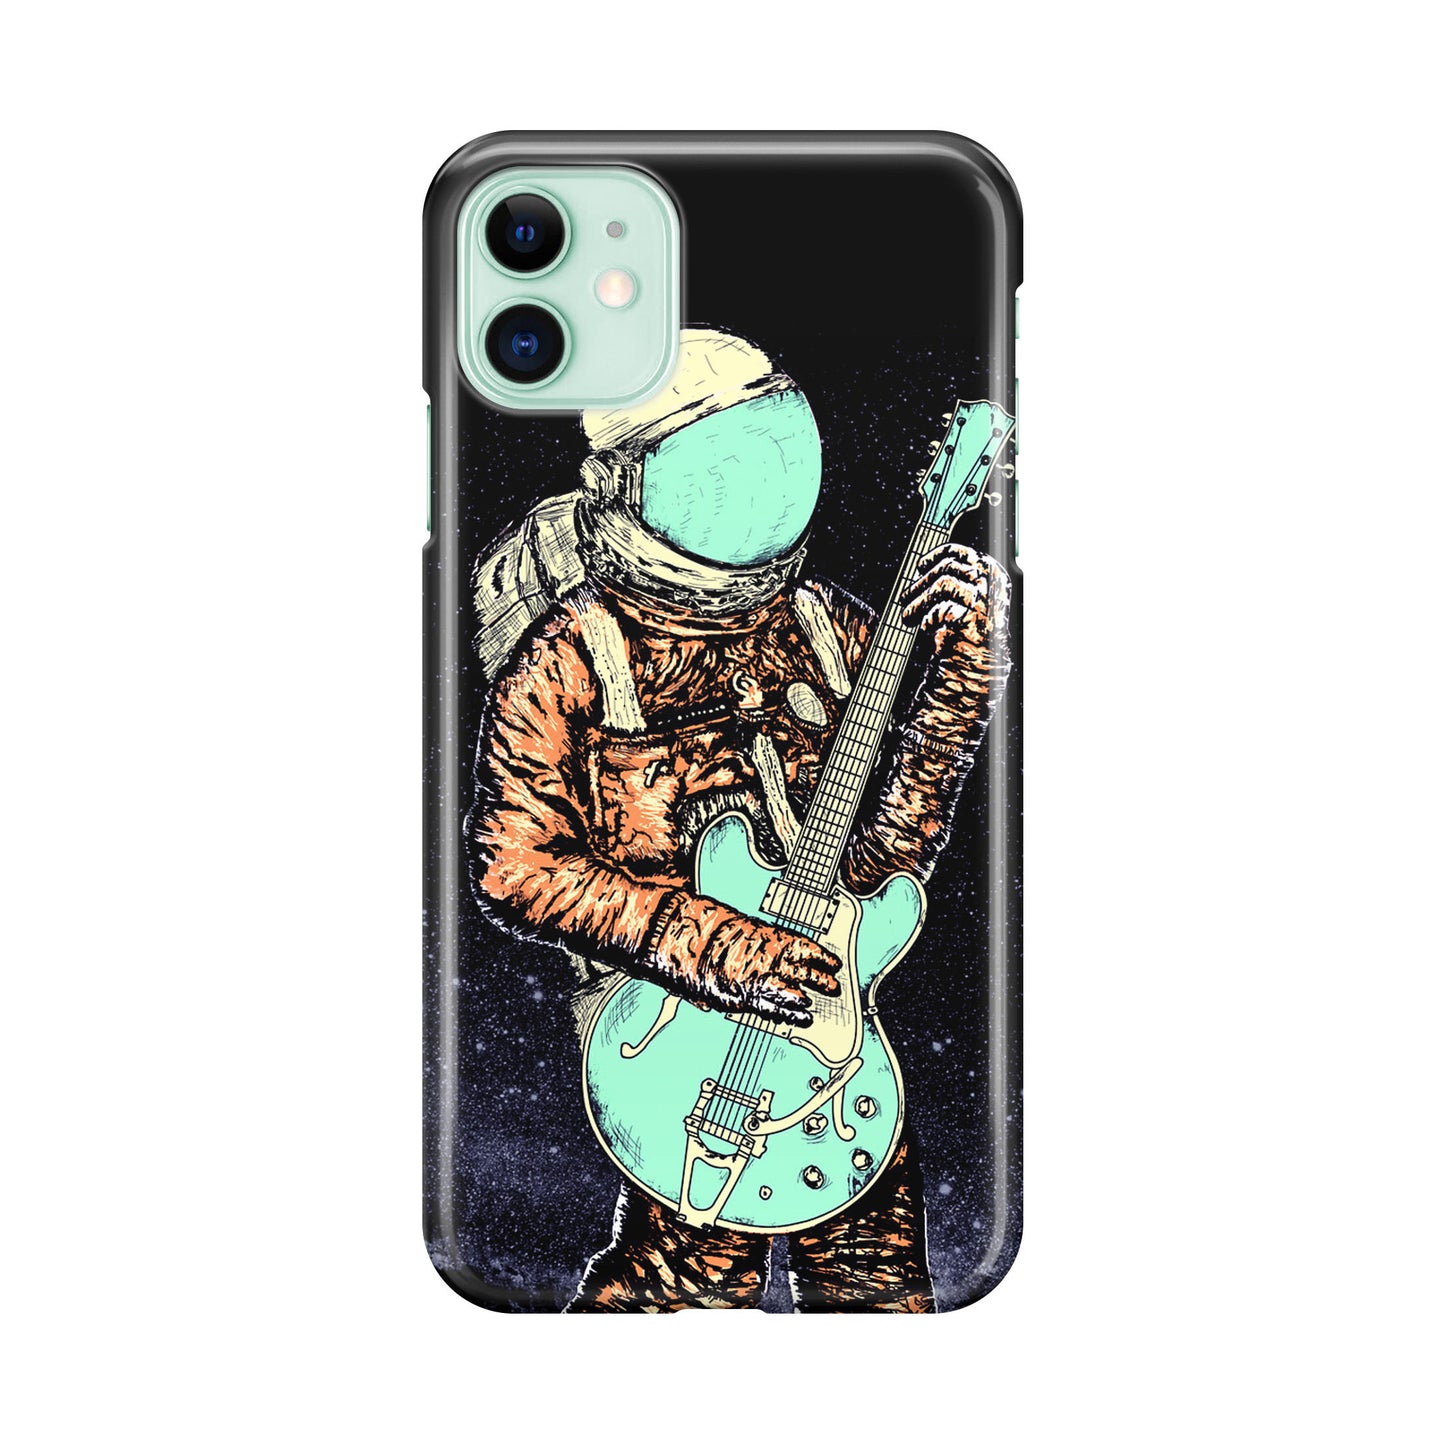 Alone In My Space iPhone 12 Case